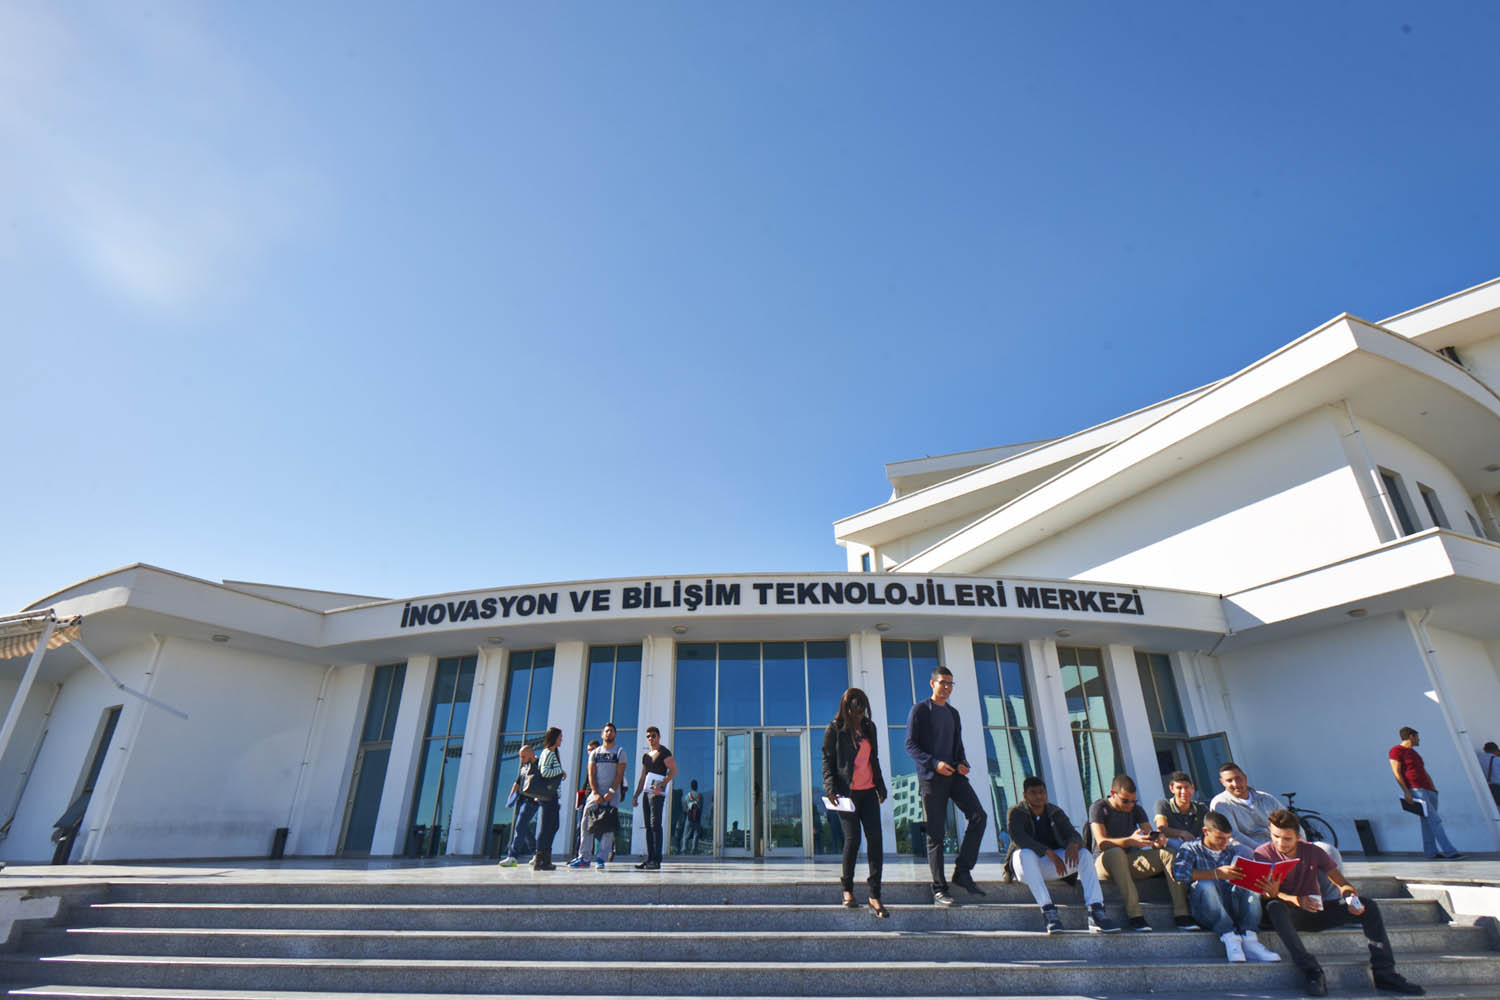 The Academic Rise of Near East University 1st in TRNC, 13th amongst